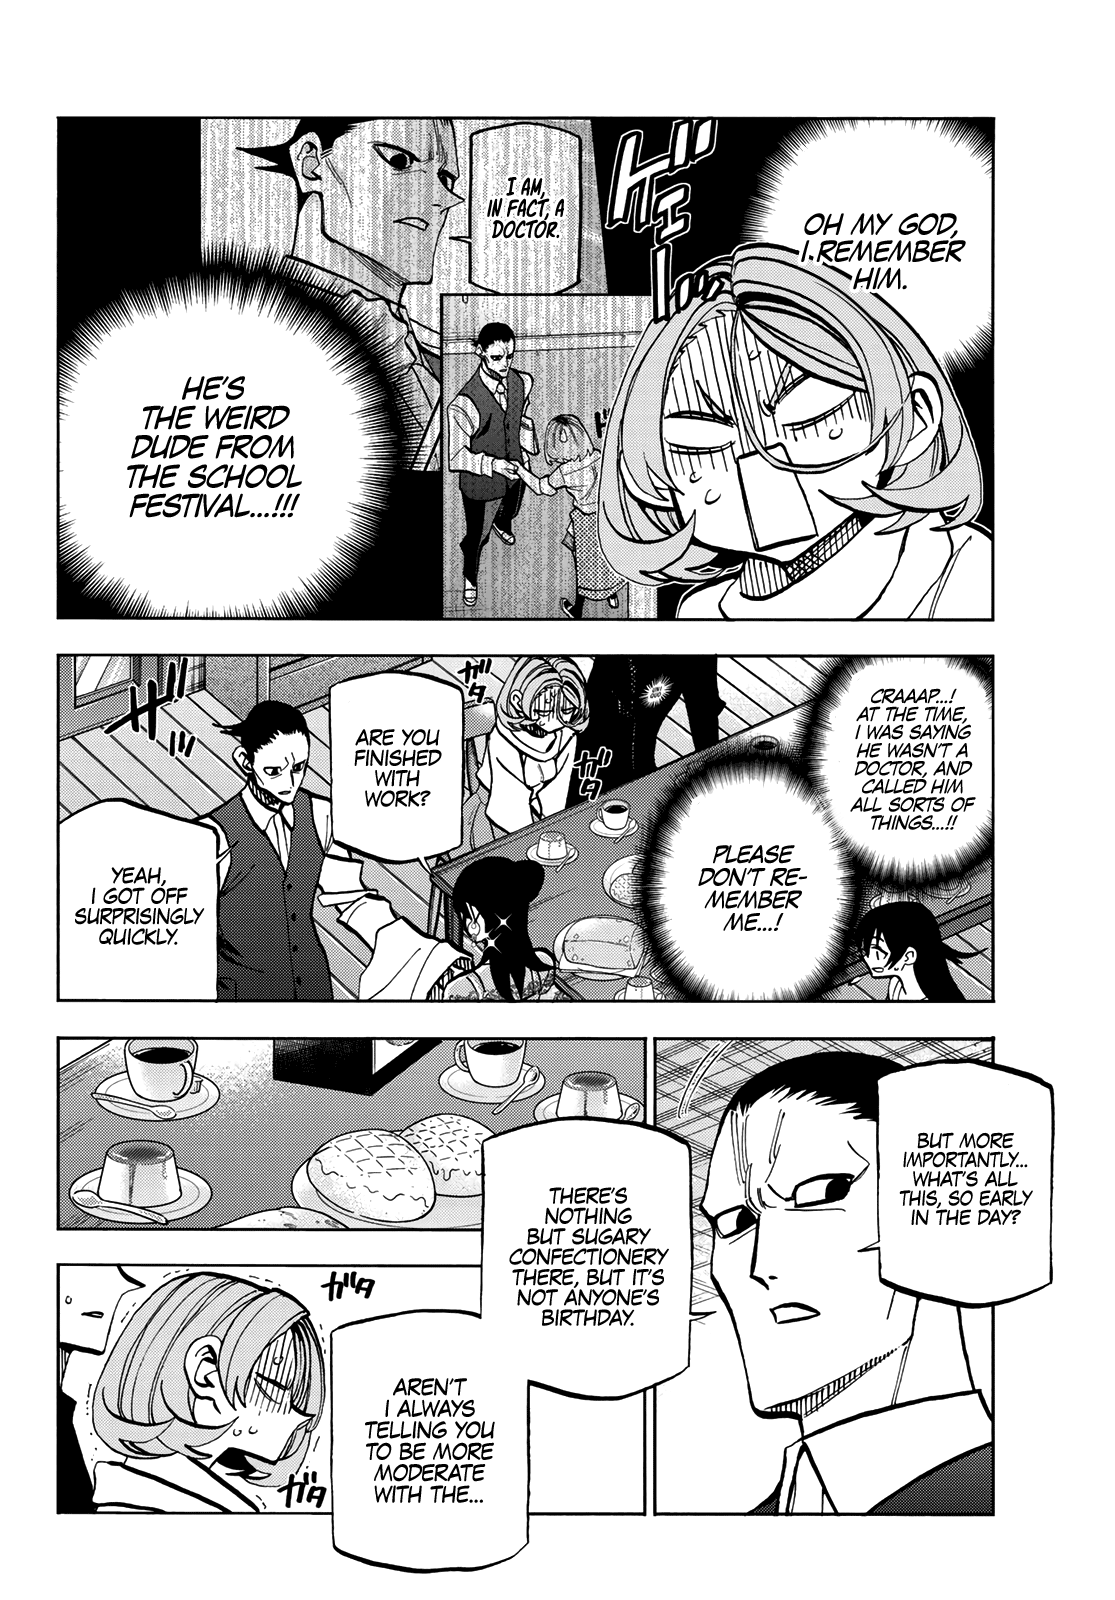 The Story Between A Dumb Prefect And A High School Girl With An Inappropriate Skirt Length - Page 2